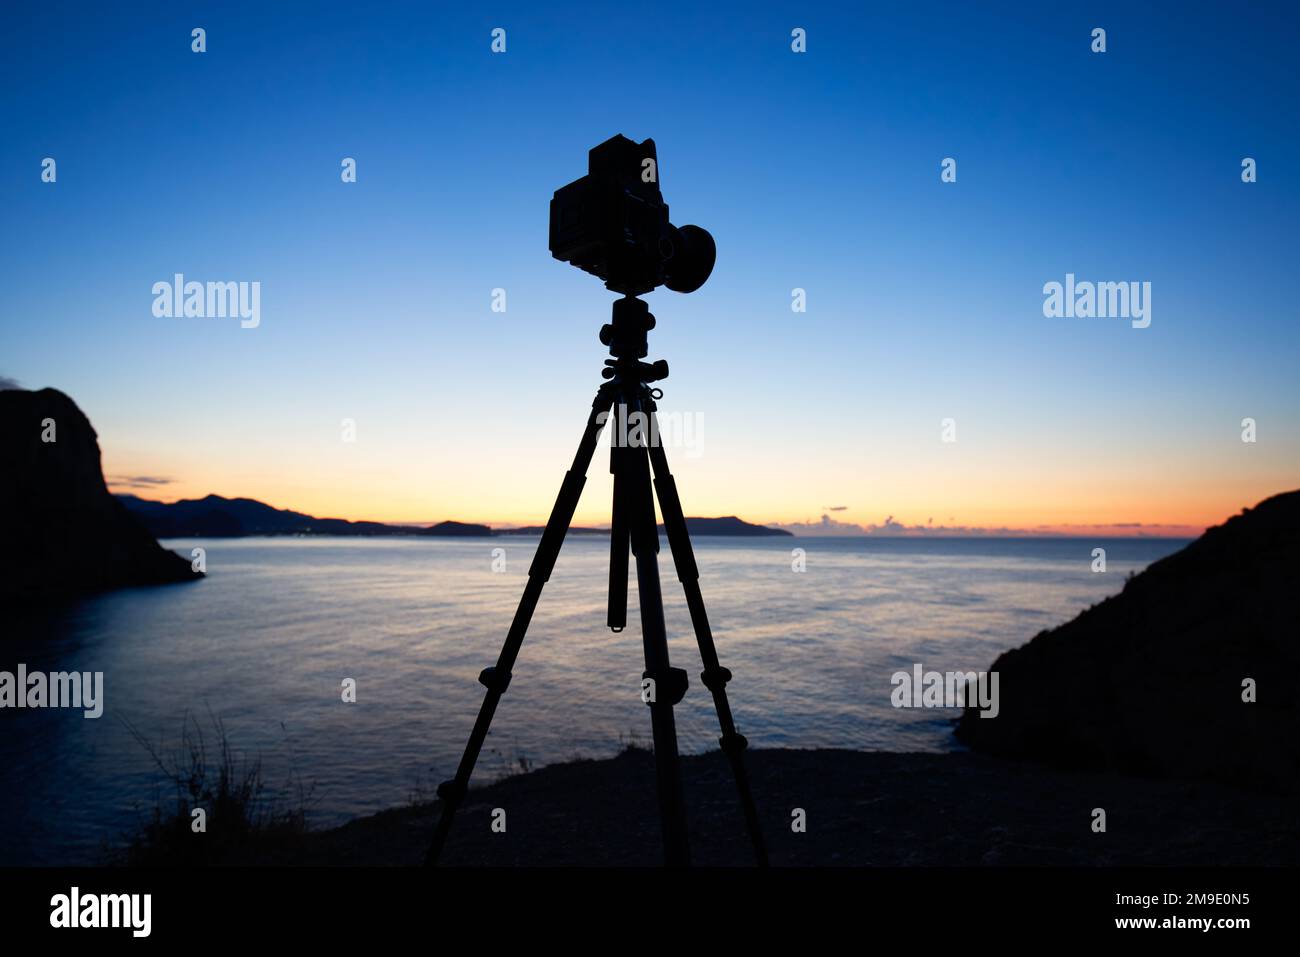 Photo camera silhouette on tripod at rocky beach with beautiful sunset in blue sea on seascape background.  Film analog photography Stock Photo